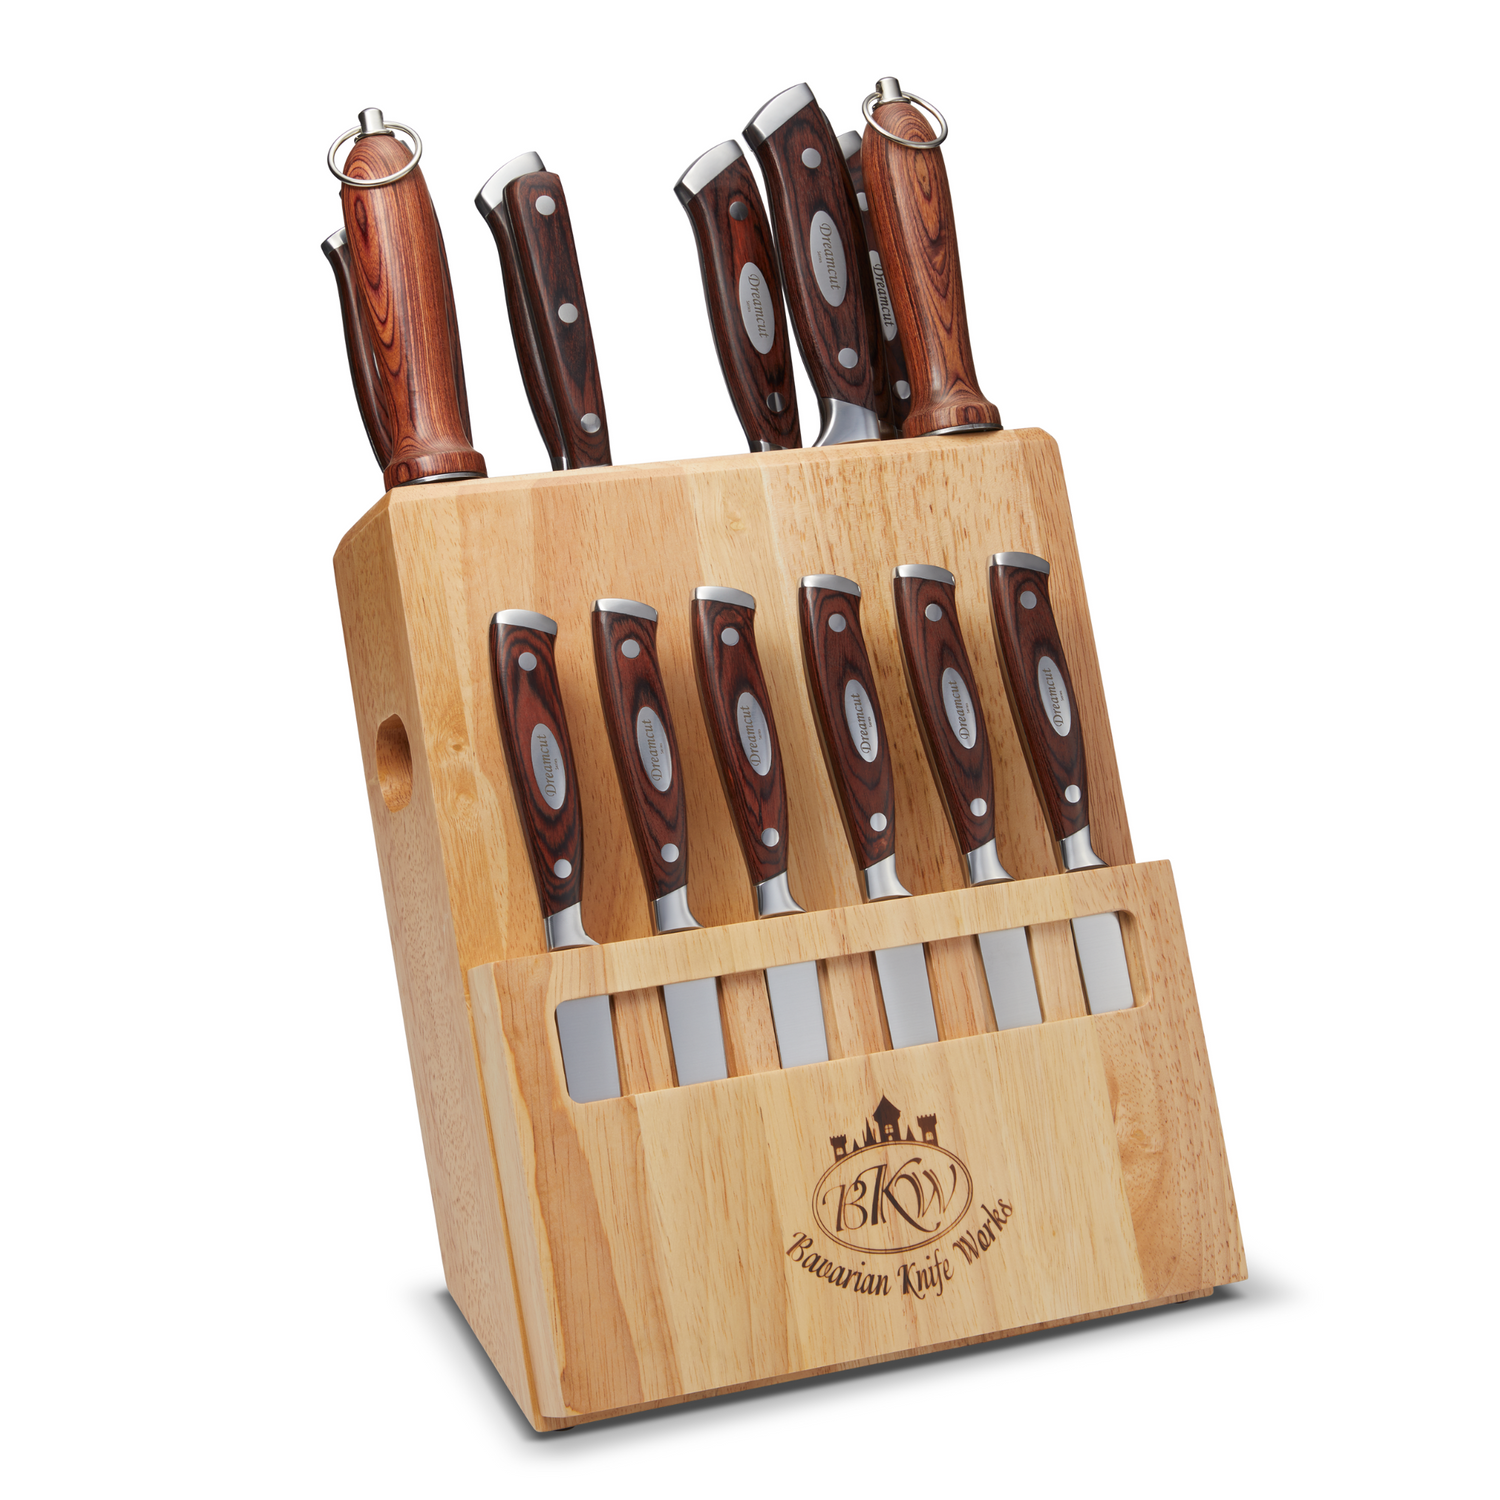 19 pc set- 12 pc set plus steak knives,  order today and get a free 8” chef knife